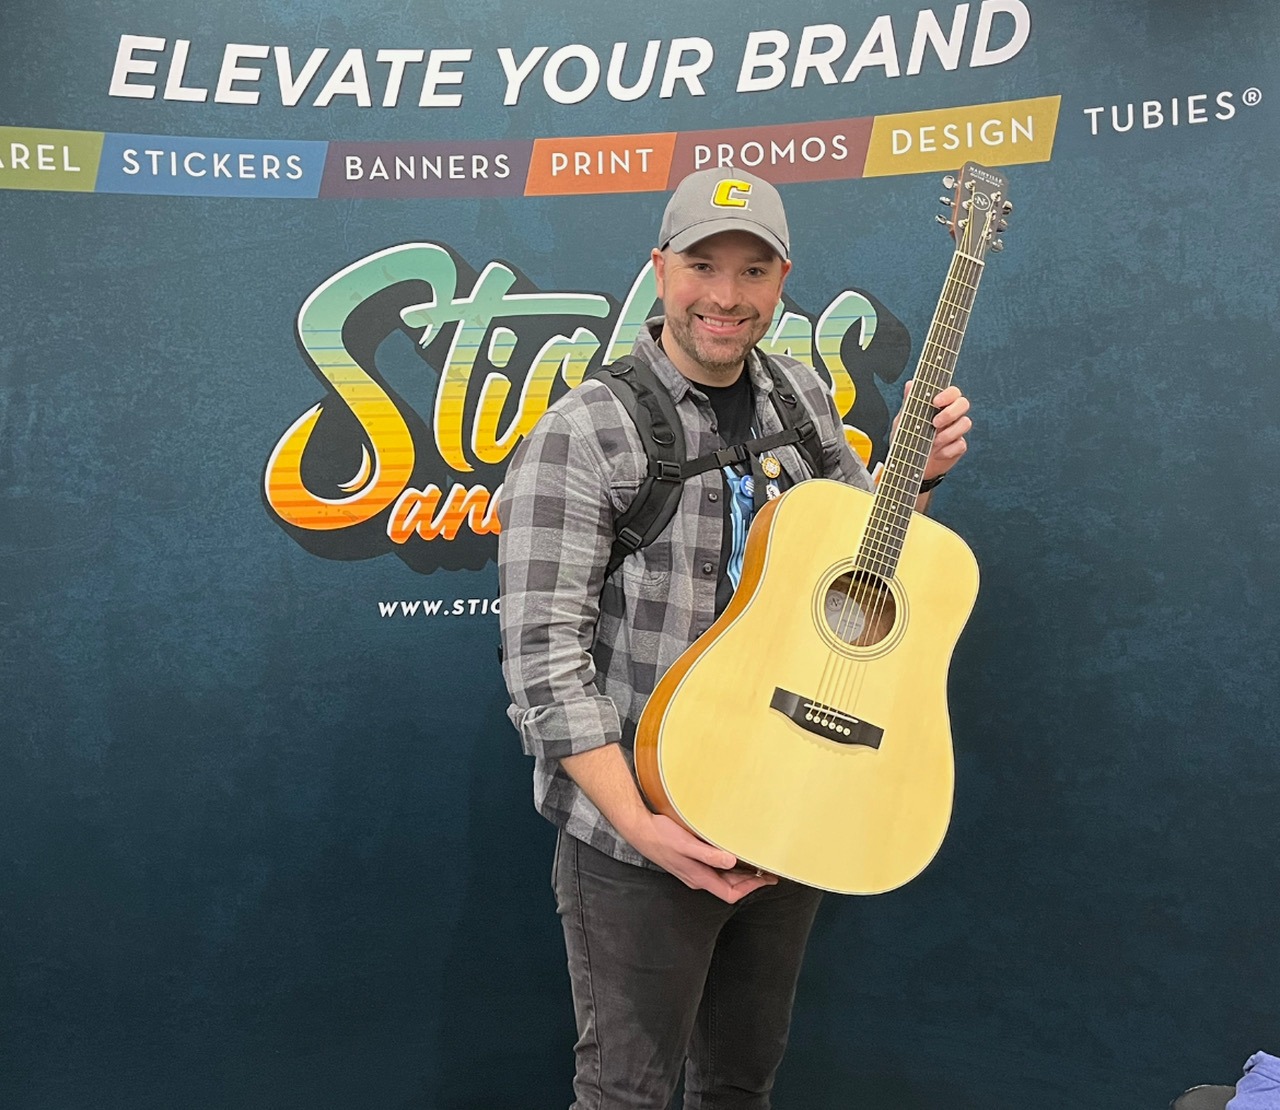 Congrats to Cody from Shiloh Baptist Church in Mt. Juliet TN, on winning our guitar at the SE Conclave Conference in Chattanooga, TN. Let us help you elevate your brand. Check out our website to see how we can help.
https://stickersandmore.com/
@myshilohbaptistchurch @ymconclave 
#guitar #funlife #winnerswin #churchlife #churching